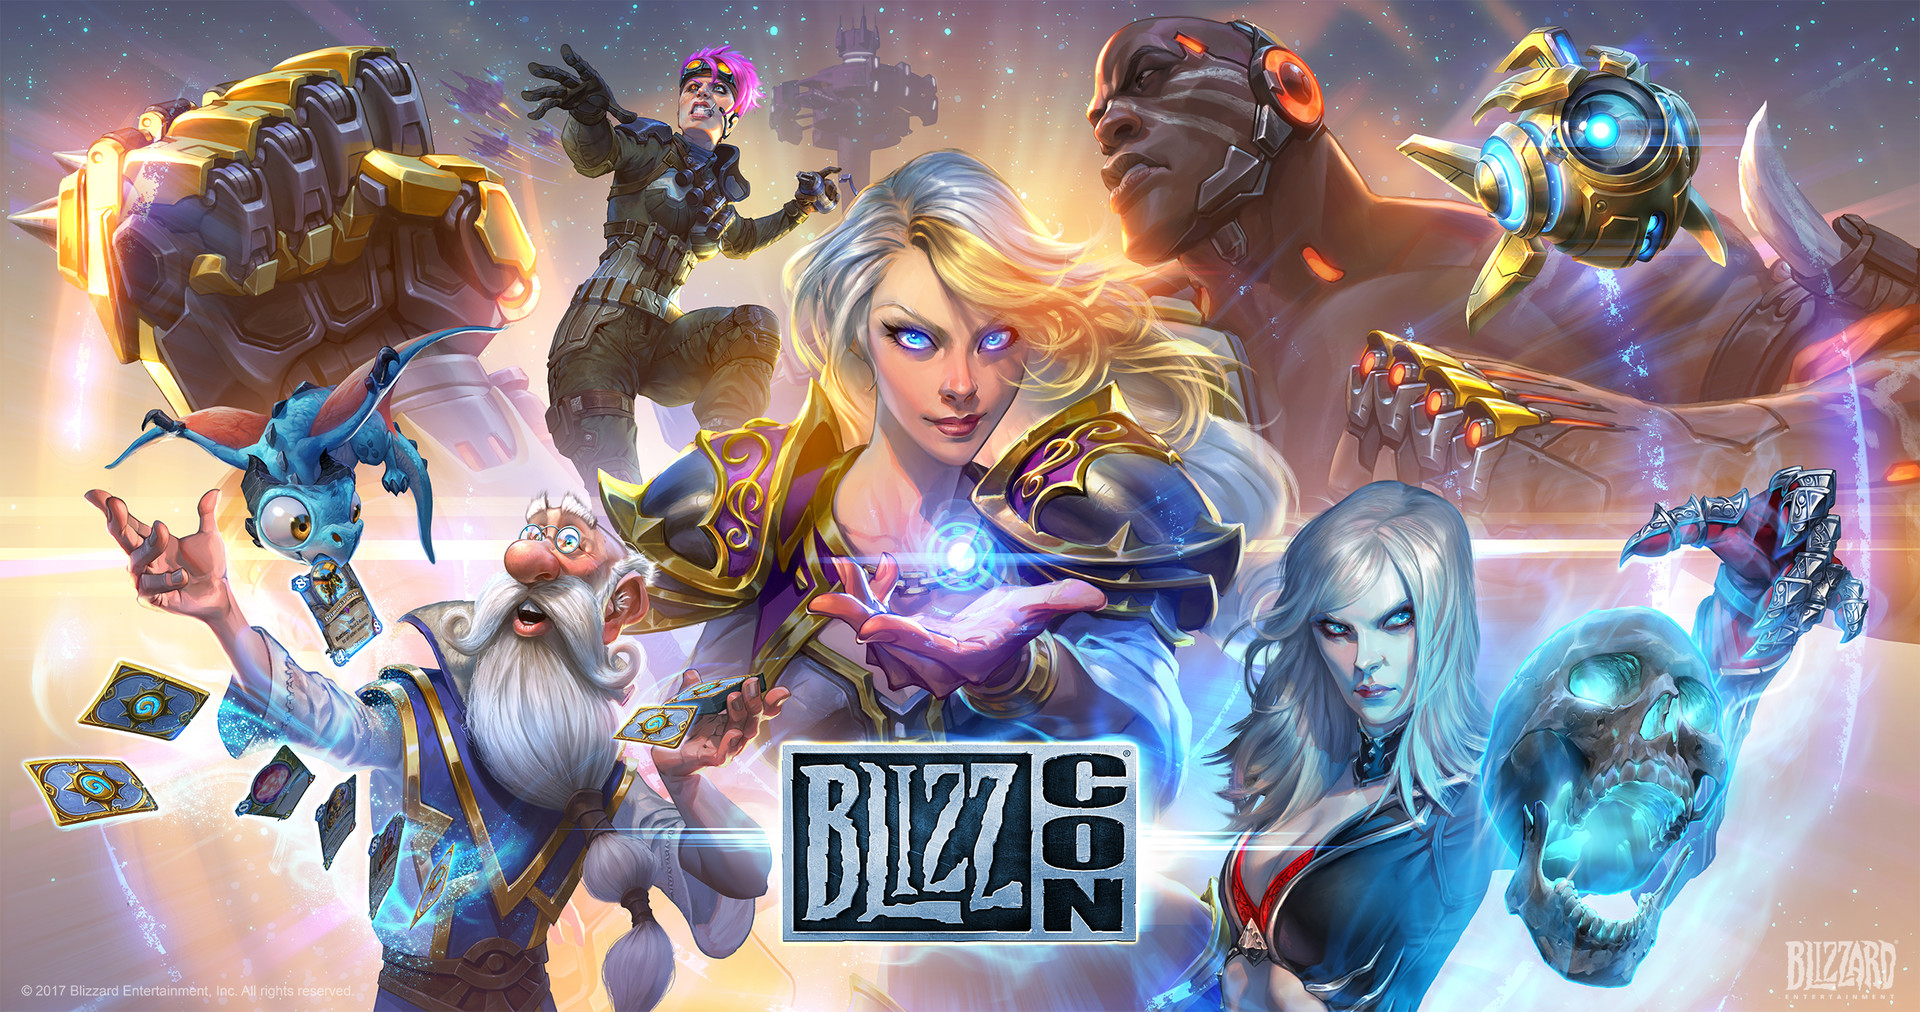 BlizzCon’s Posters Were Great